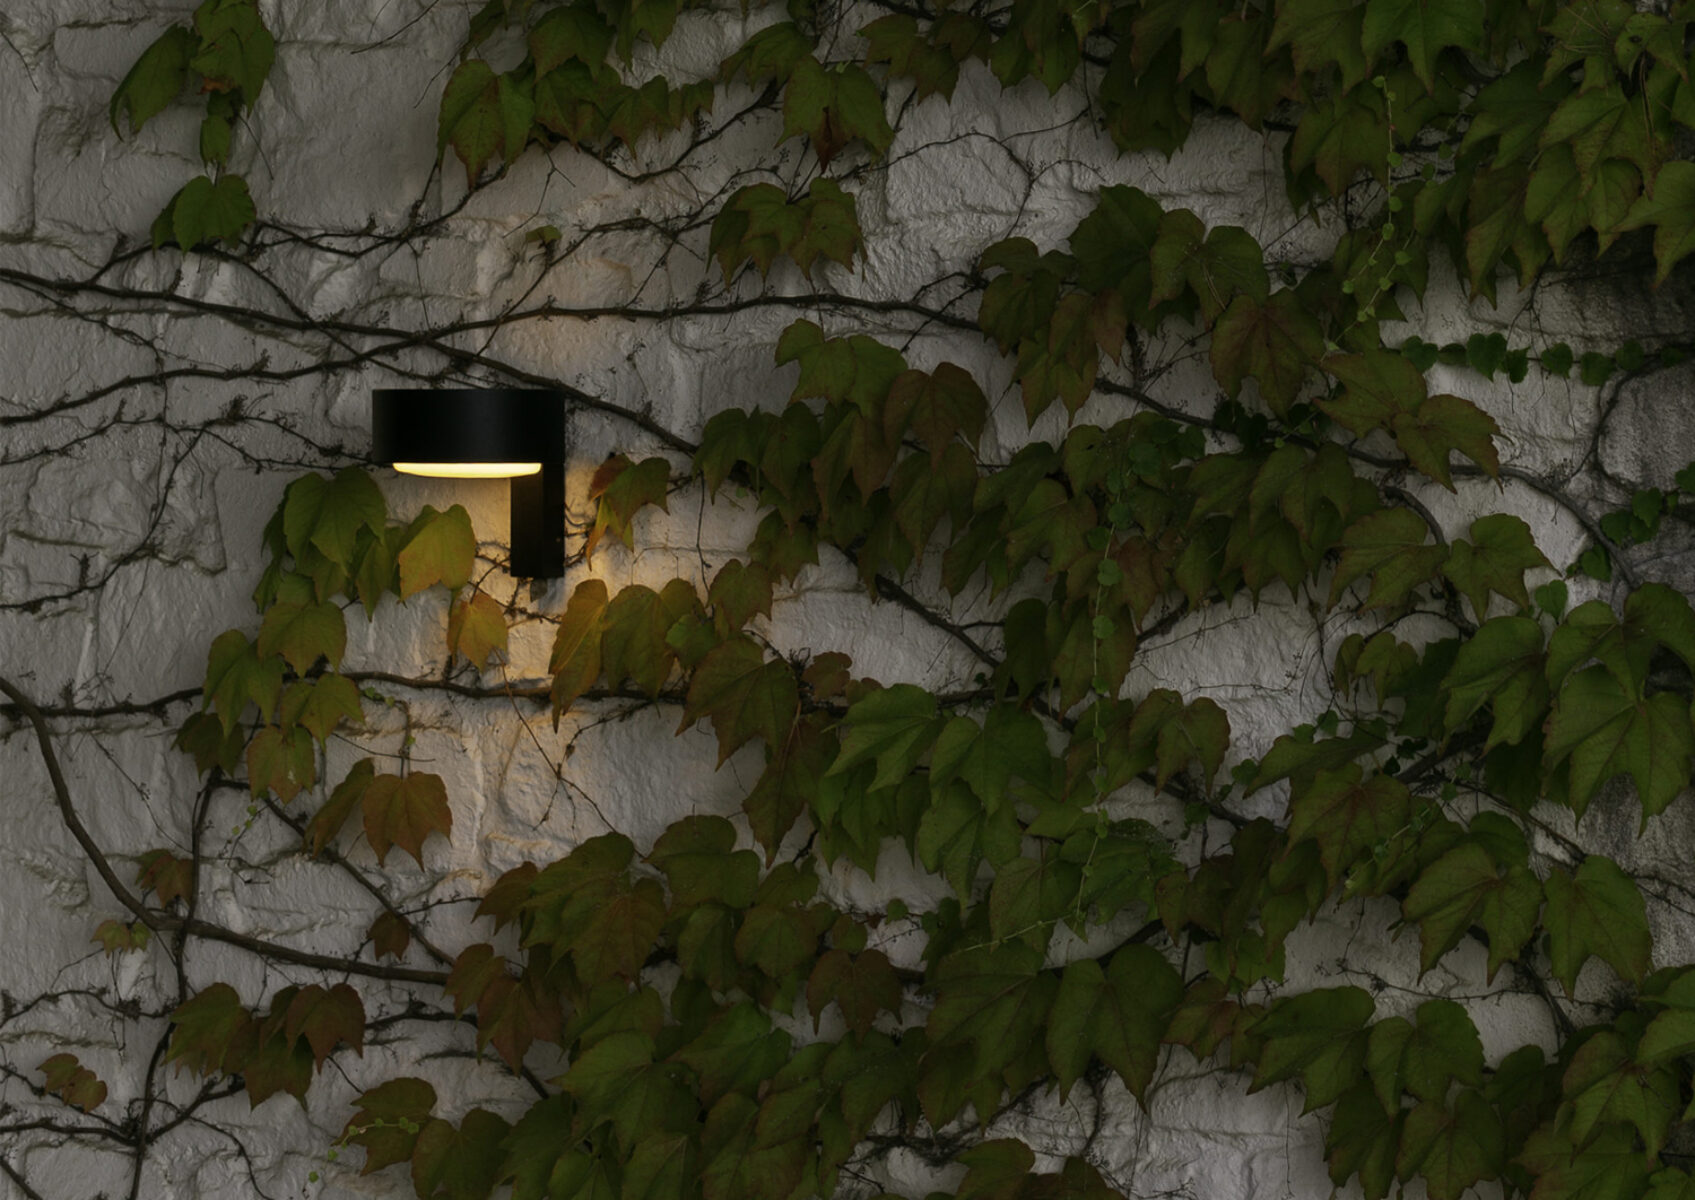 Plaff-on Perpendicular Outdoor Wall Lamp